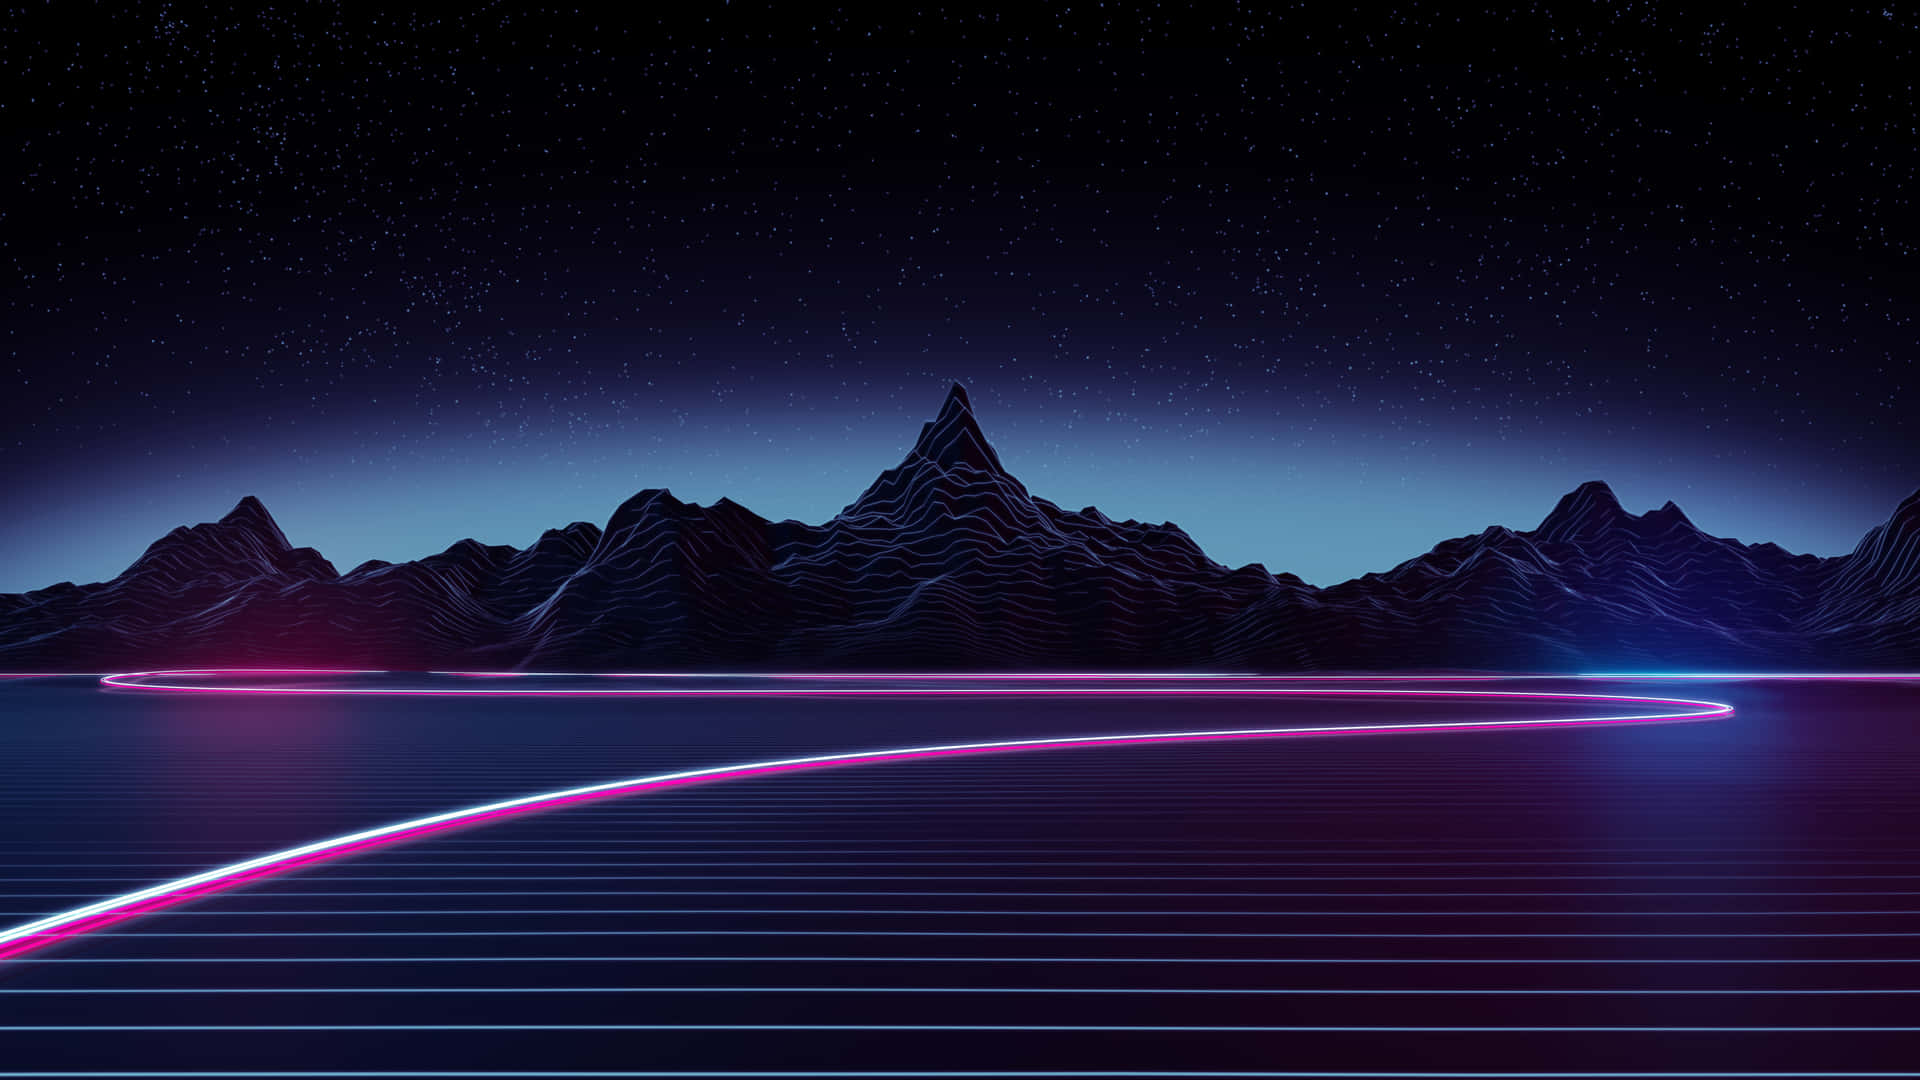 “Dive into the Future with Retrowave”